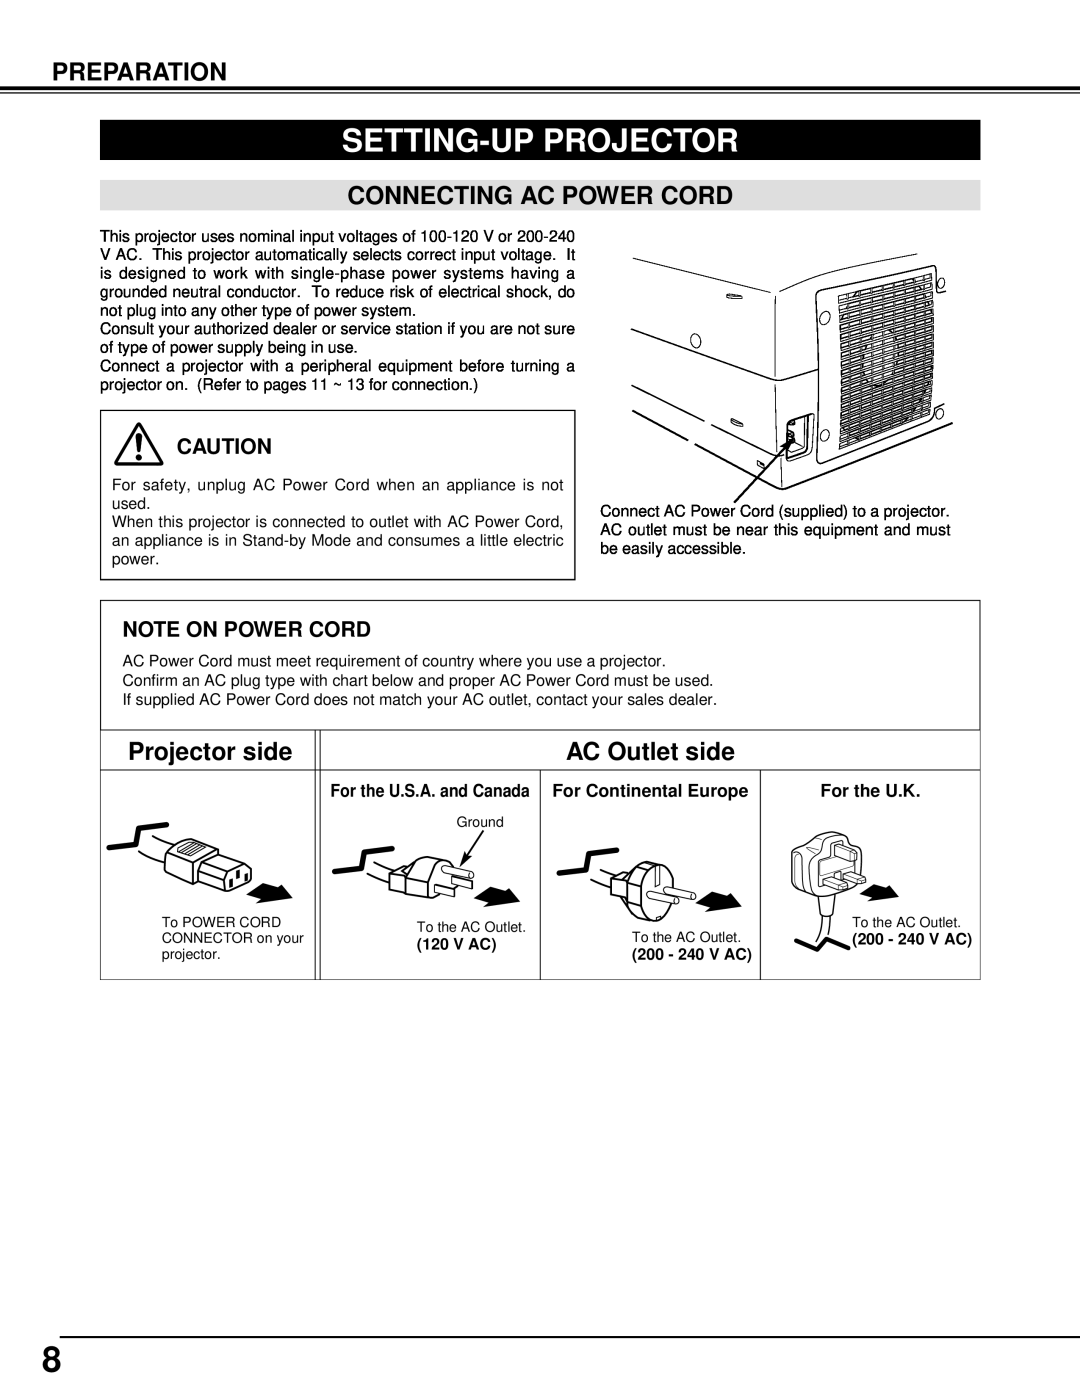 Sanyo PLV-70 owner manual Setting-Up Projector, Connecting Ac Power Cord, Projector side, AC Outlet side, Preparation, V Ac 